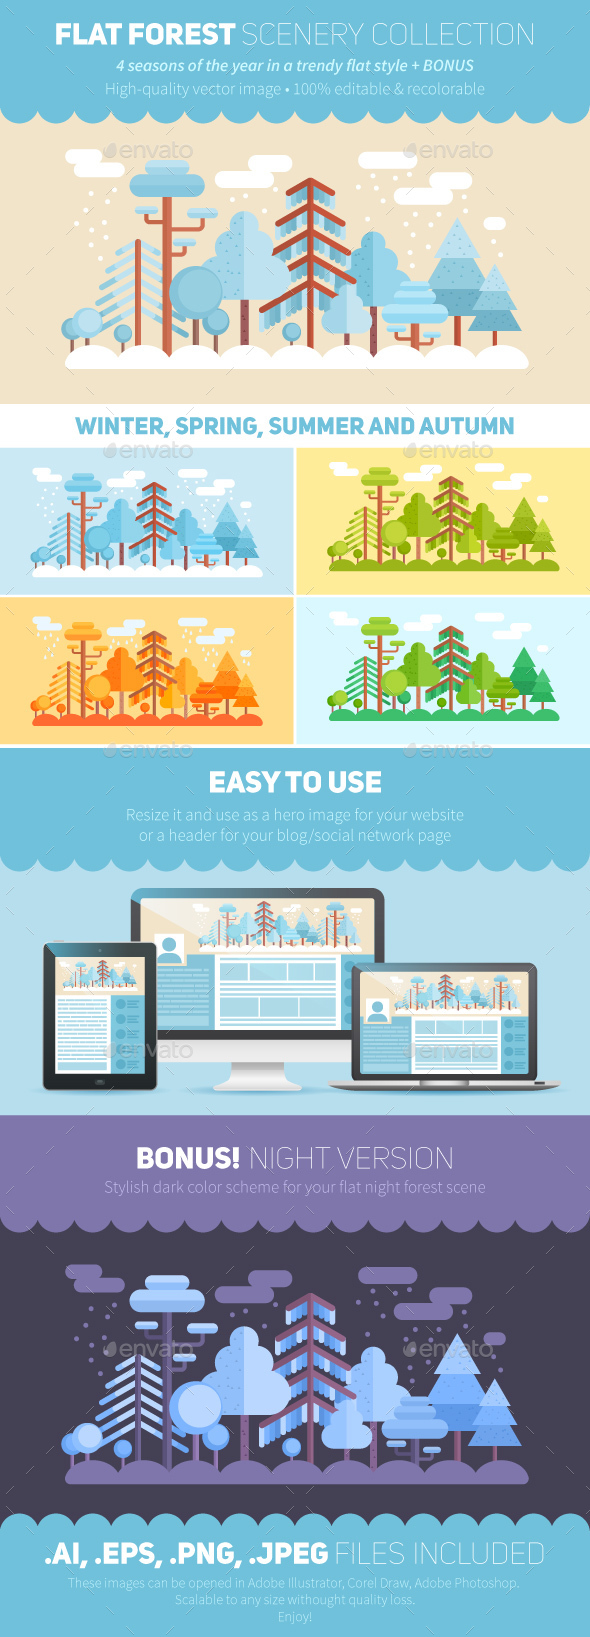 Flat Style Forest Scenery: 6 Color Schemes